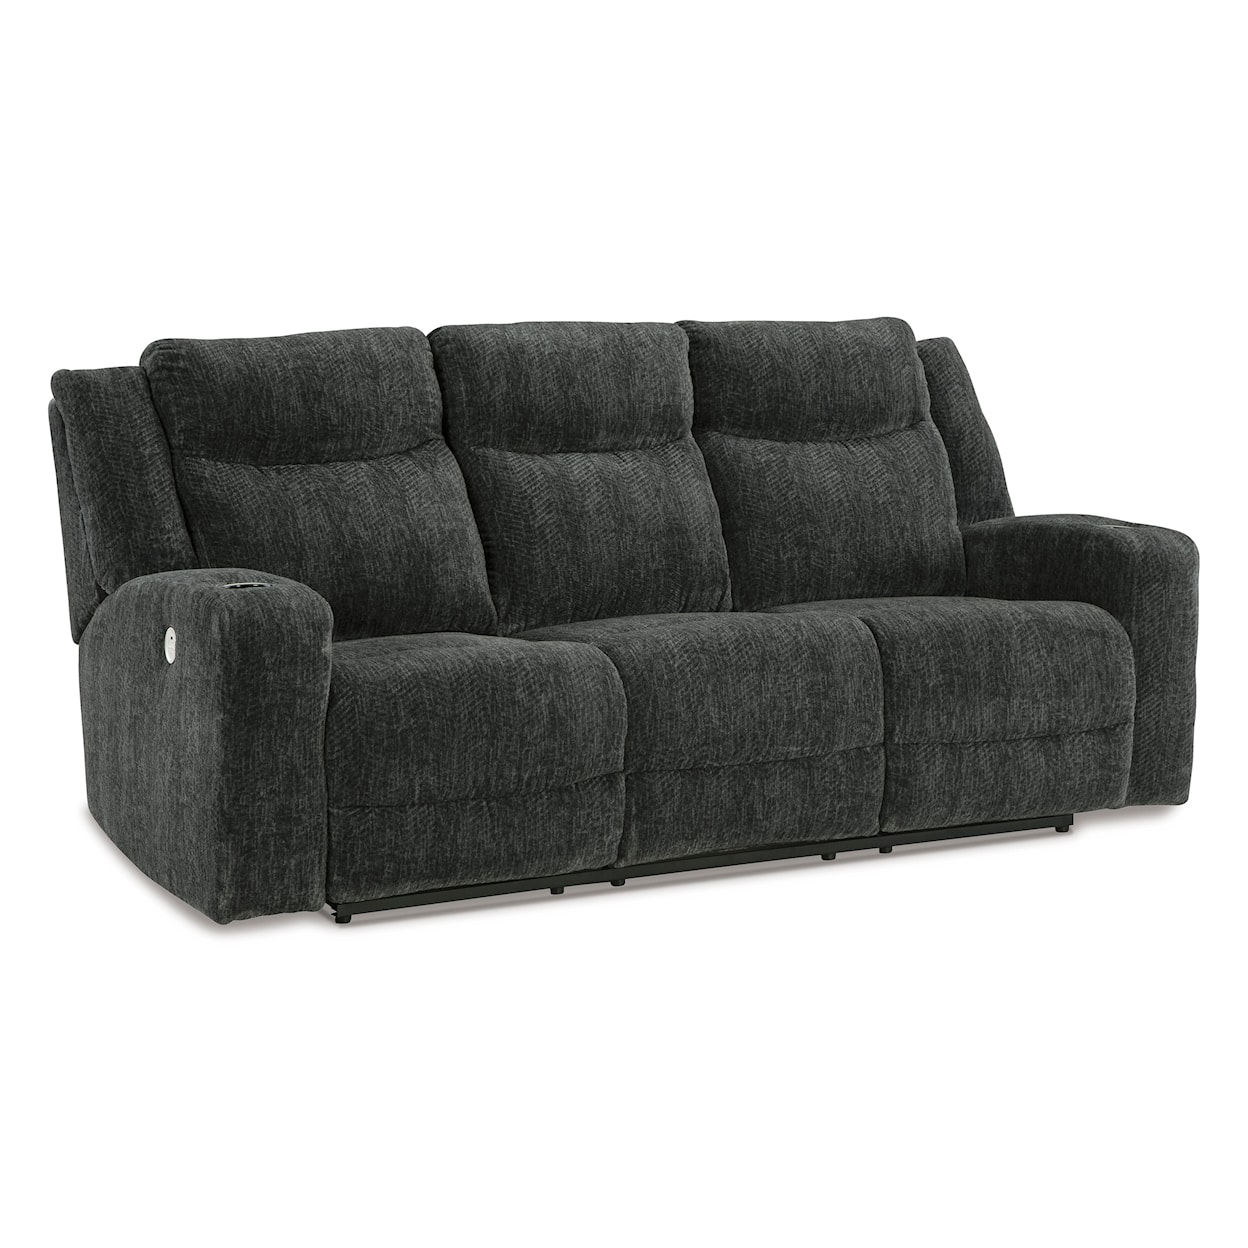 Signature Design by Ashley Martinglenn Power Reclining Sofa with Drop Down Table